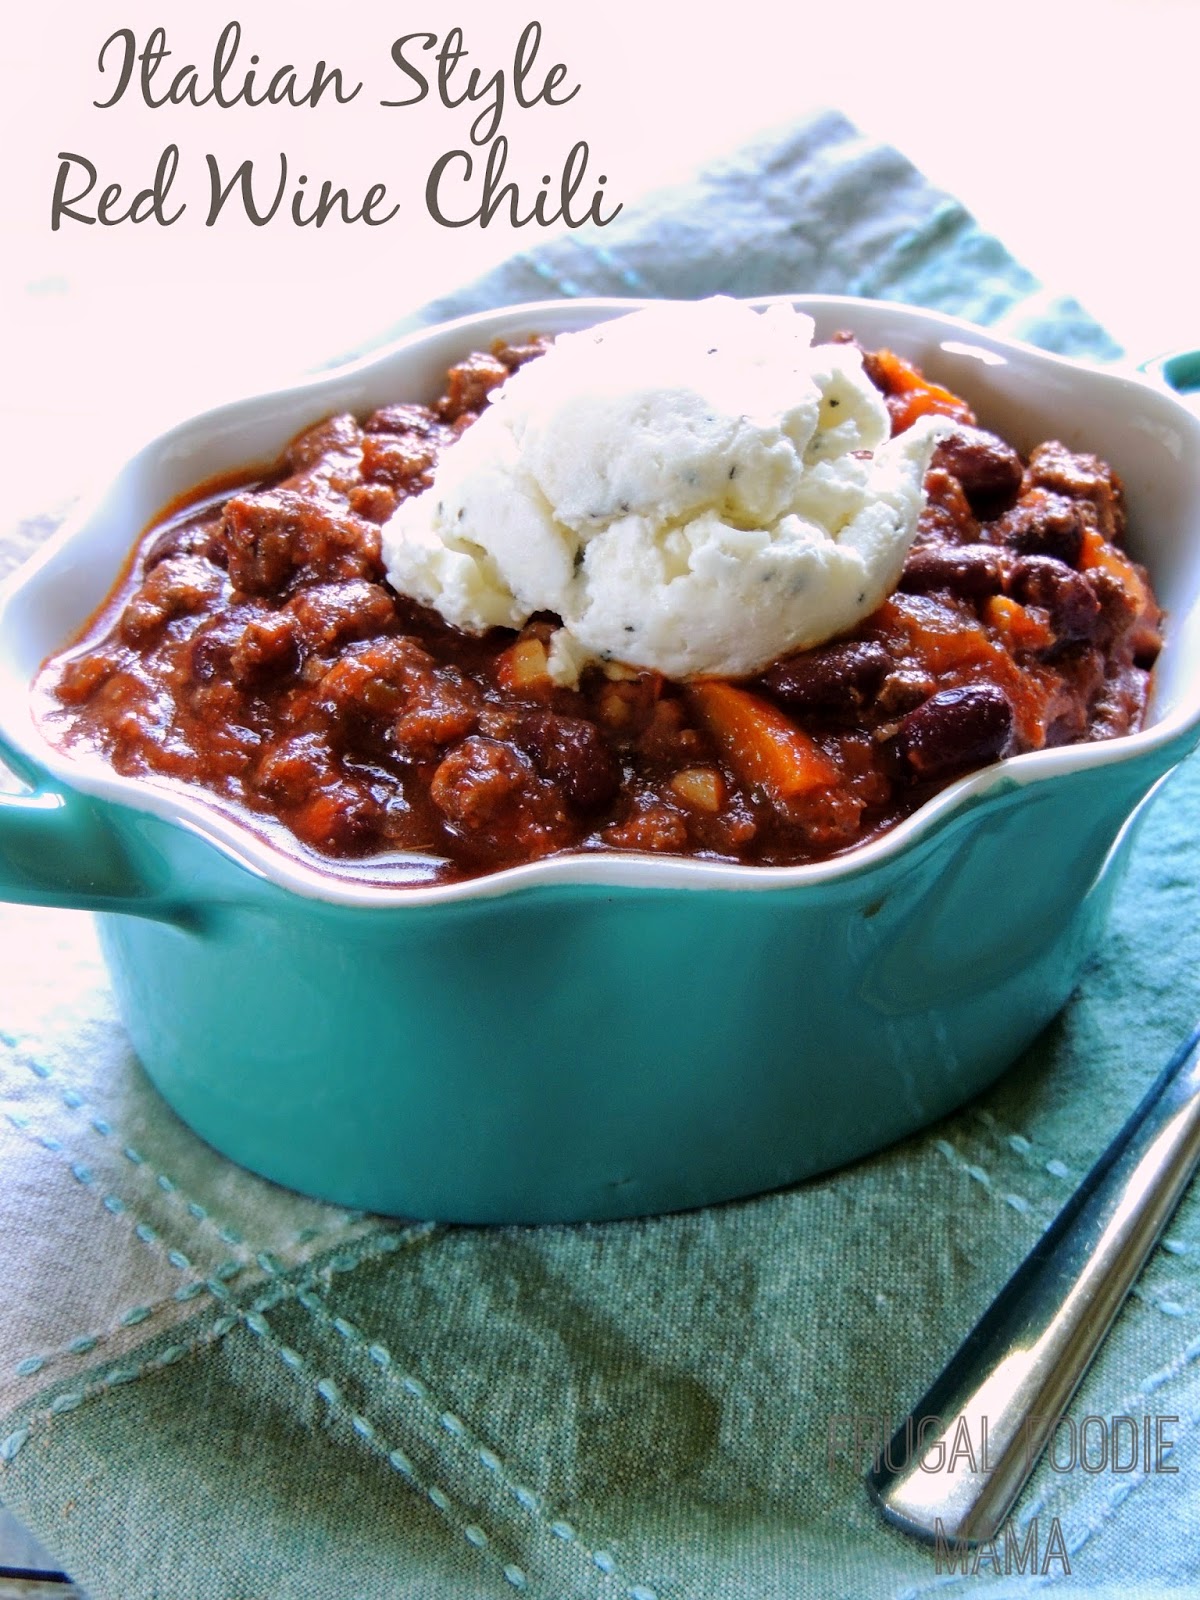 This rich & flavorful Italian Style Red Wine Chili with a delicious Italian flavor twist from herbs and red wine simmers in your slow cooker all day